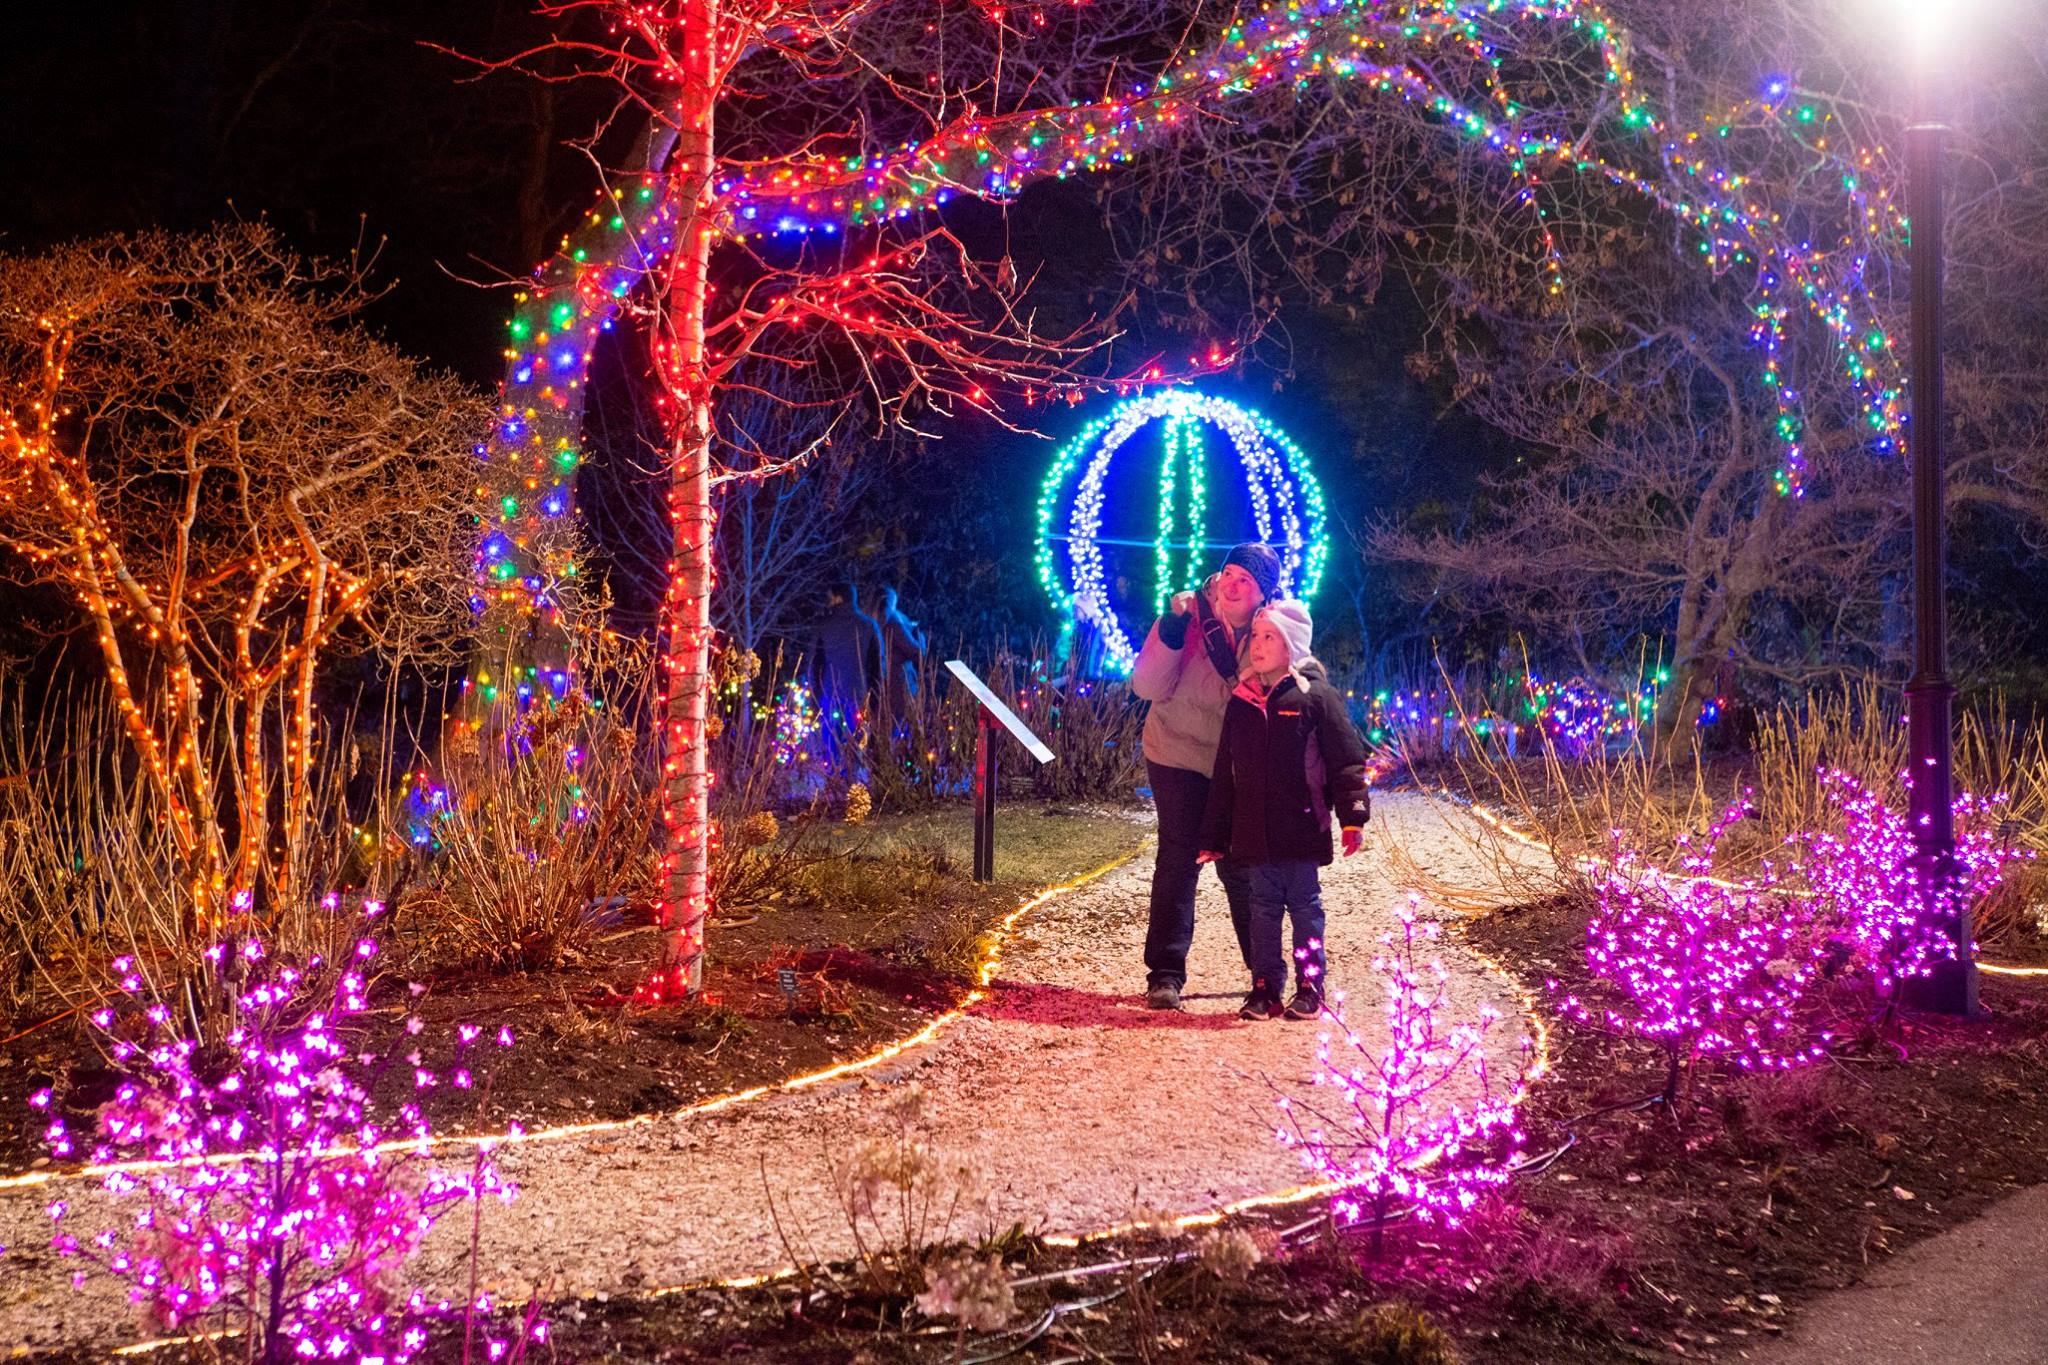 Gardens Aglow Light Show 2020 At Heritage Museums & Gardens